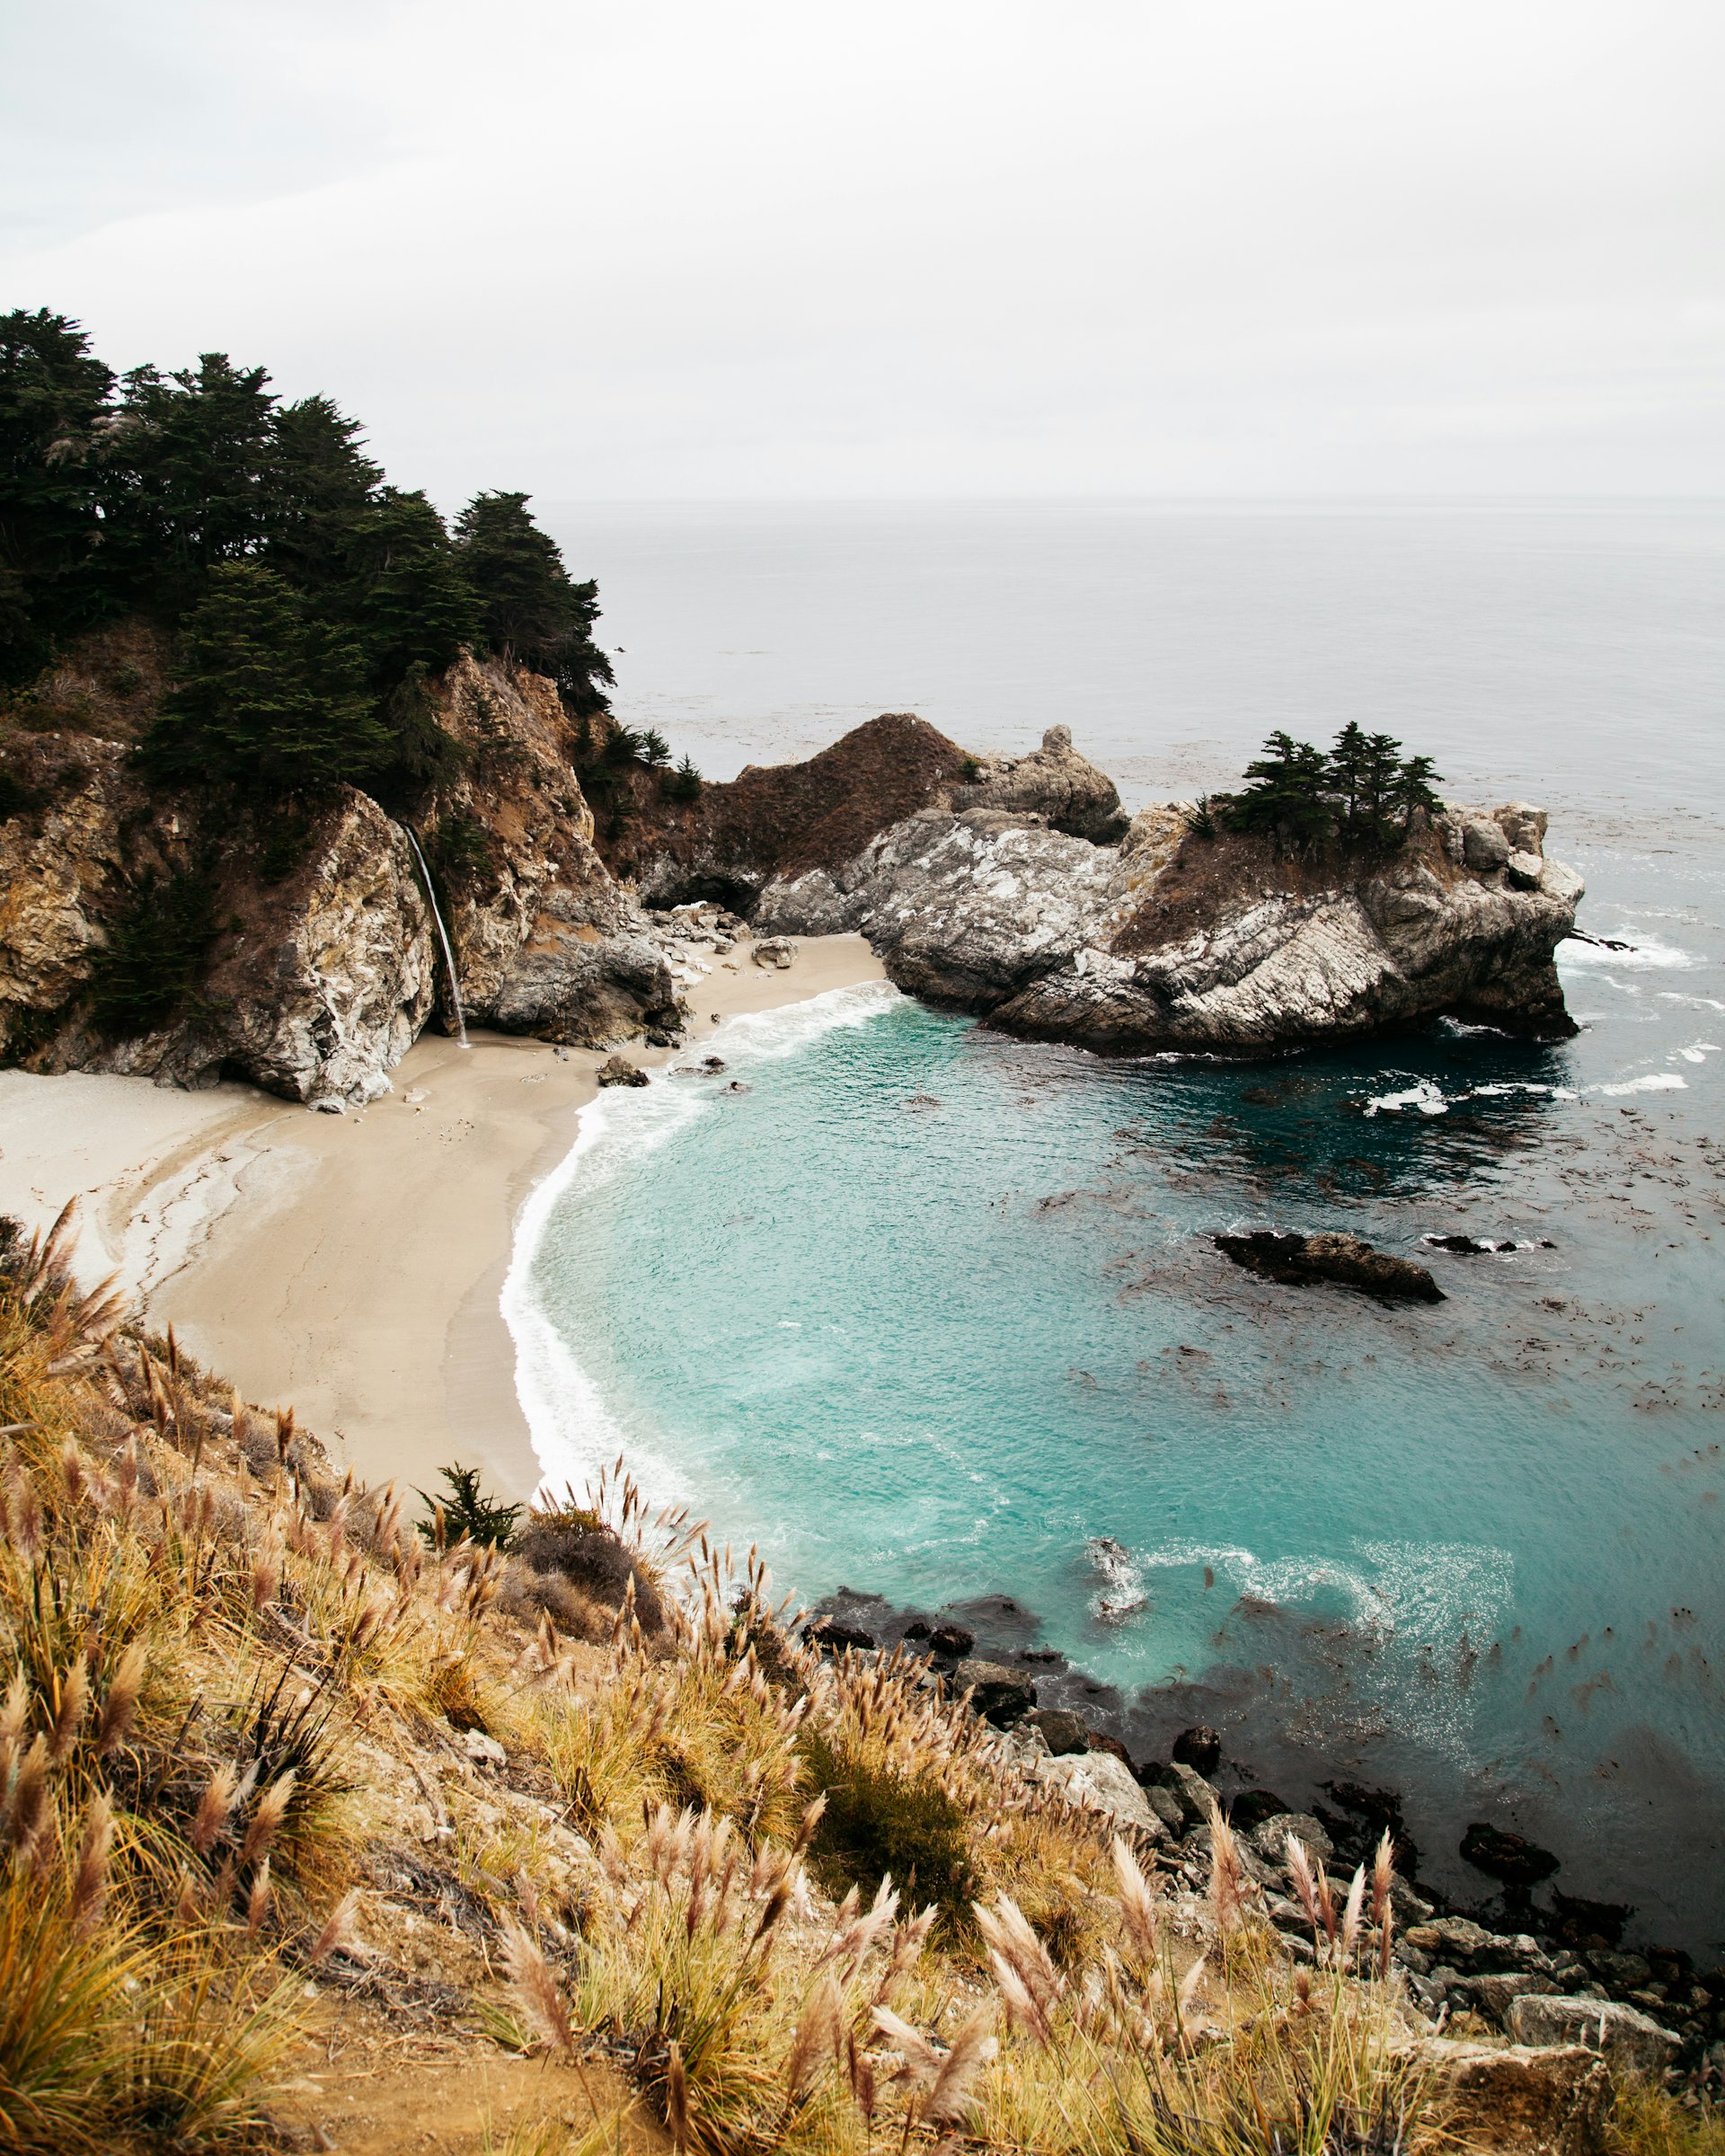 McWay falls, a waterfall on the beach, in Big Sur